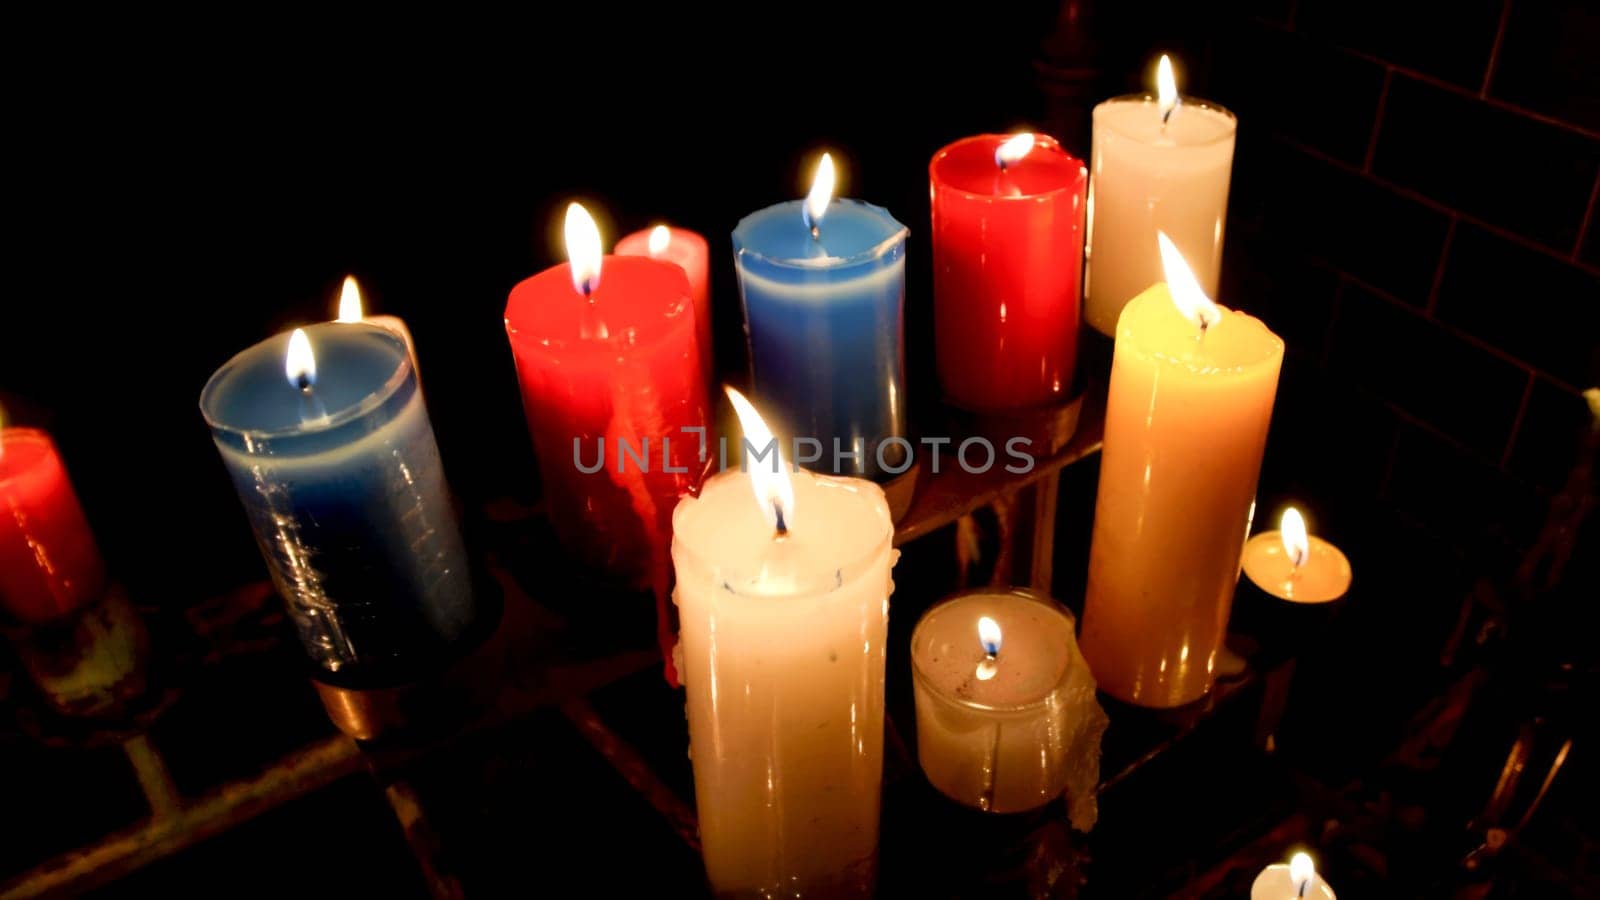 Creating a warm and serene ambiance with assorted colored candlelight for a cozy and intimate evening decoration, perfect for meditation and relaxation in a peaceful and festive atmosphere